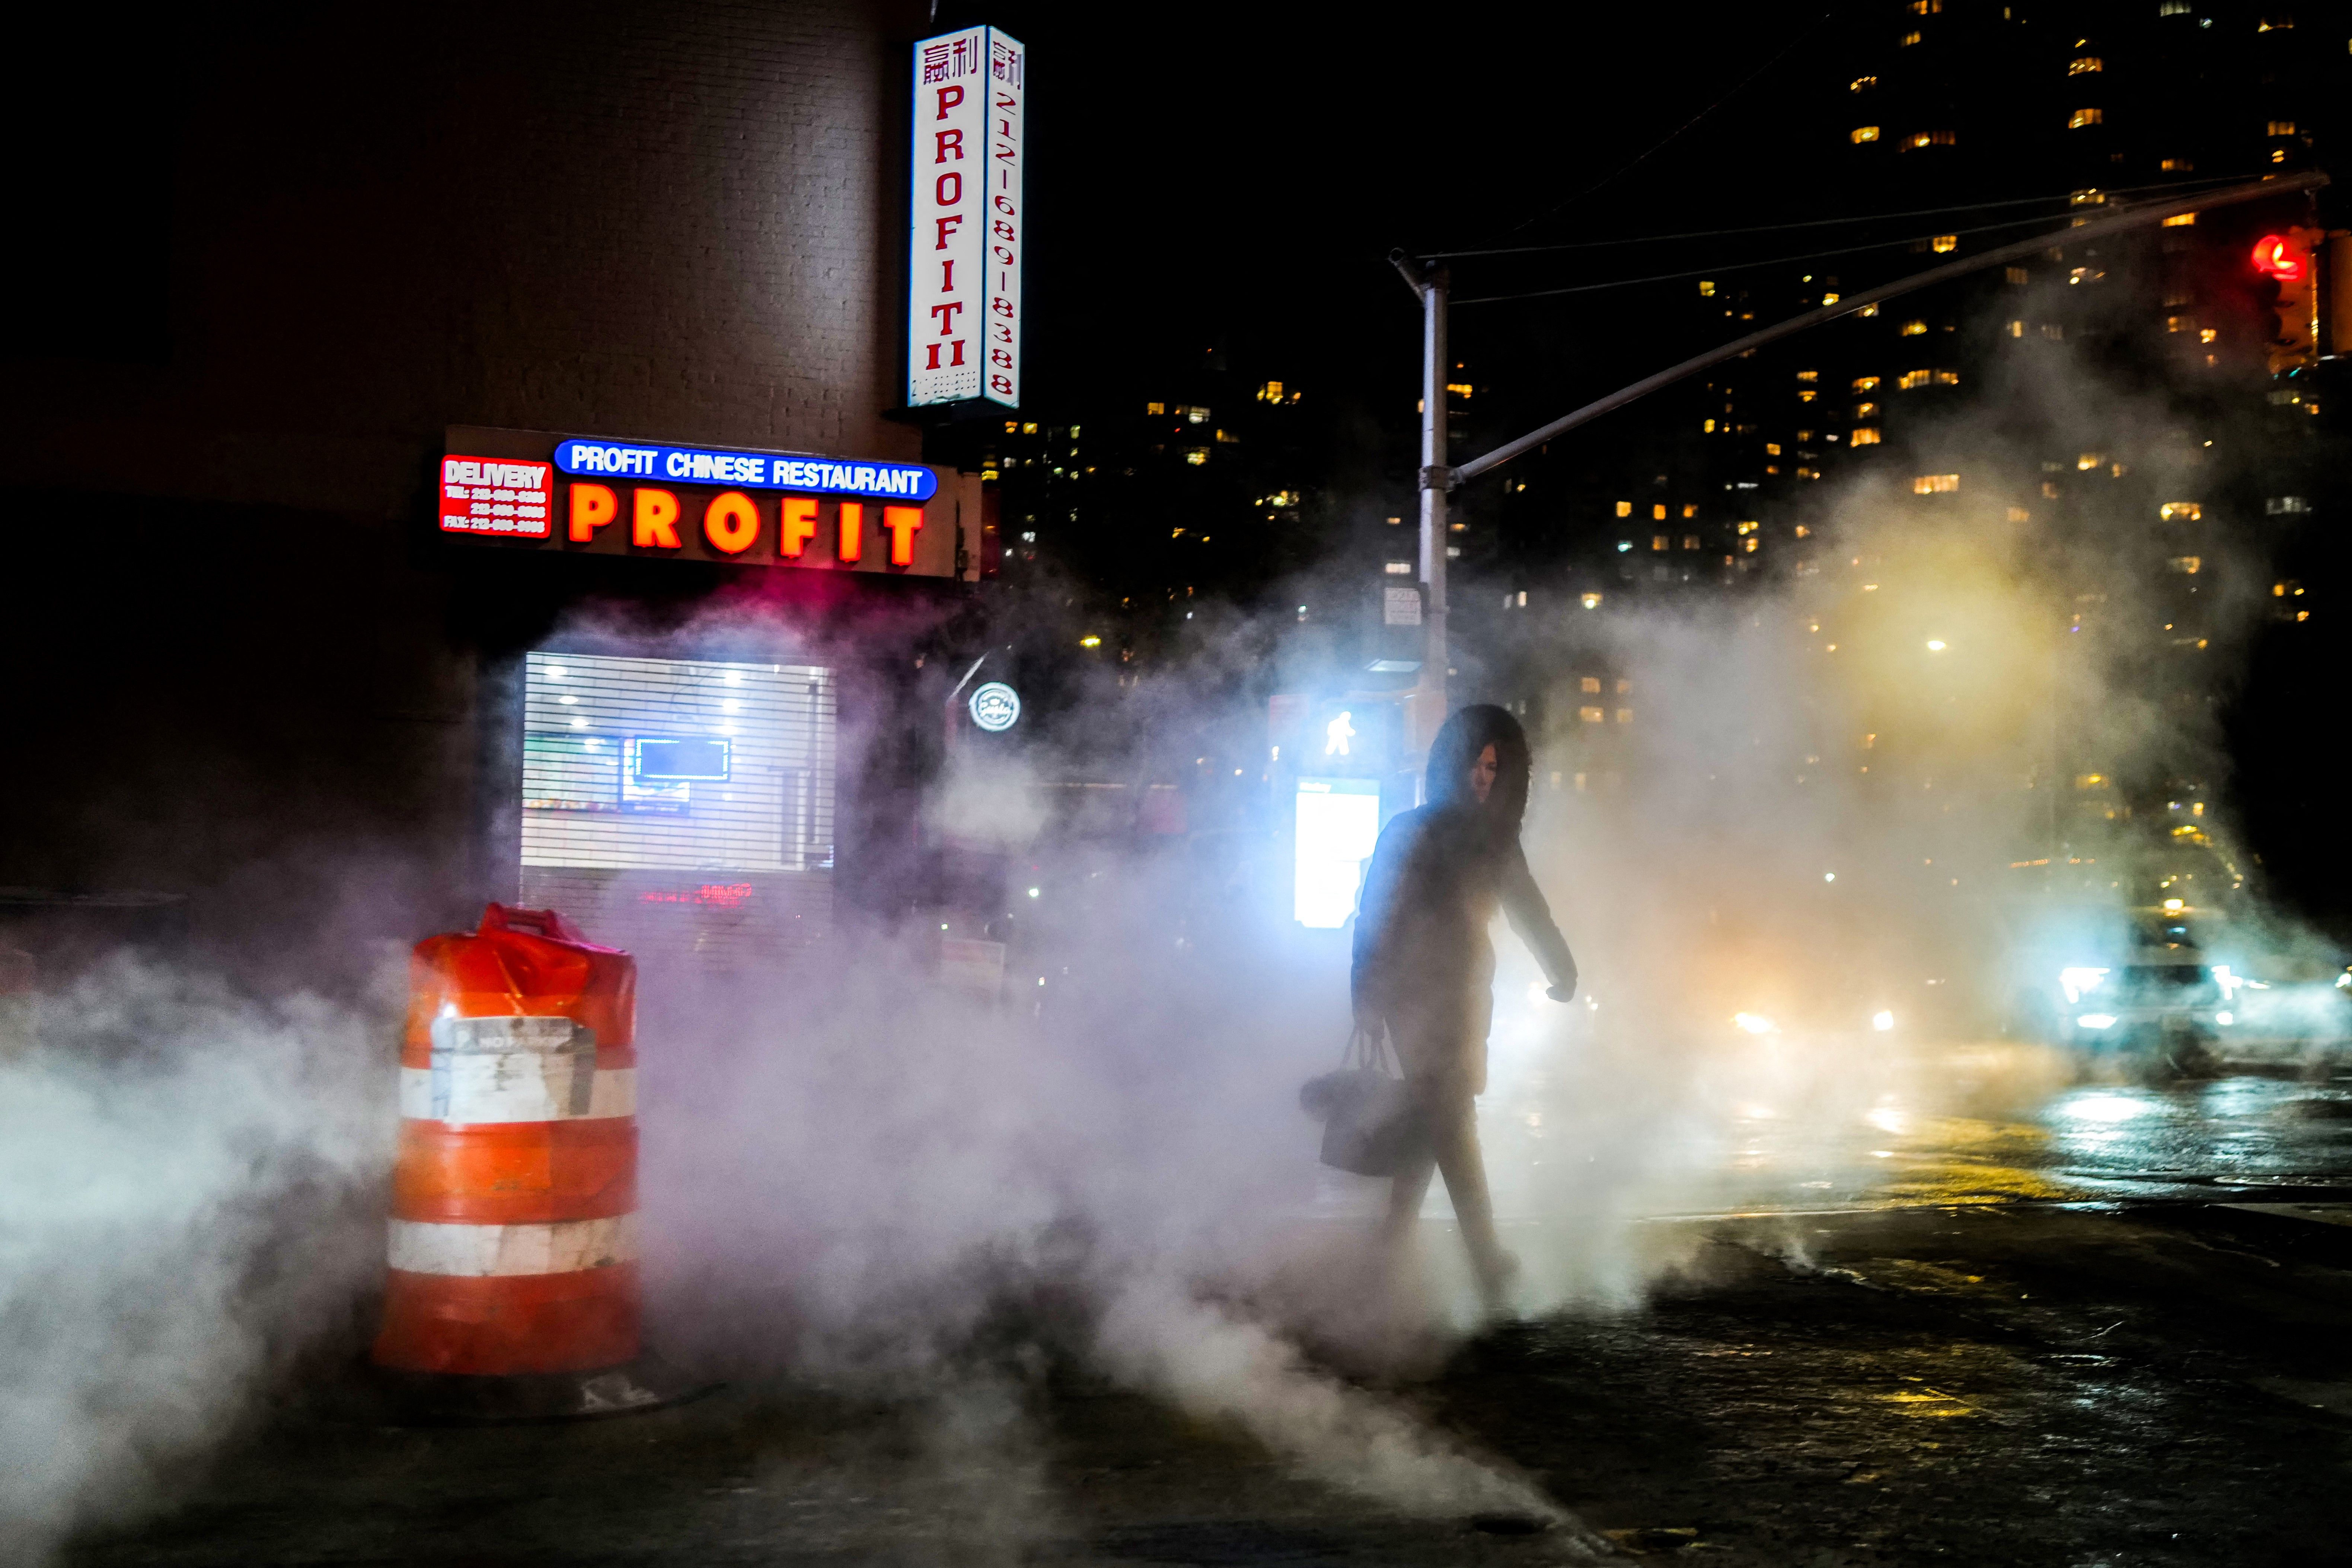 A woman crosses a street during a cold evening as hot steam escapes from the ground in the Manhattan borough of New York on January 16, 2024. New York finally ended a record streak of more than 700 days without measurable snowfall, with a thin layer of white powder covering Central Park and other parts of America's most populous city. 